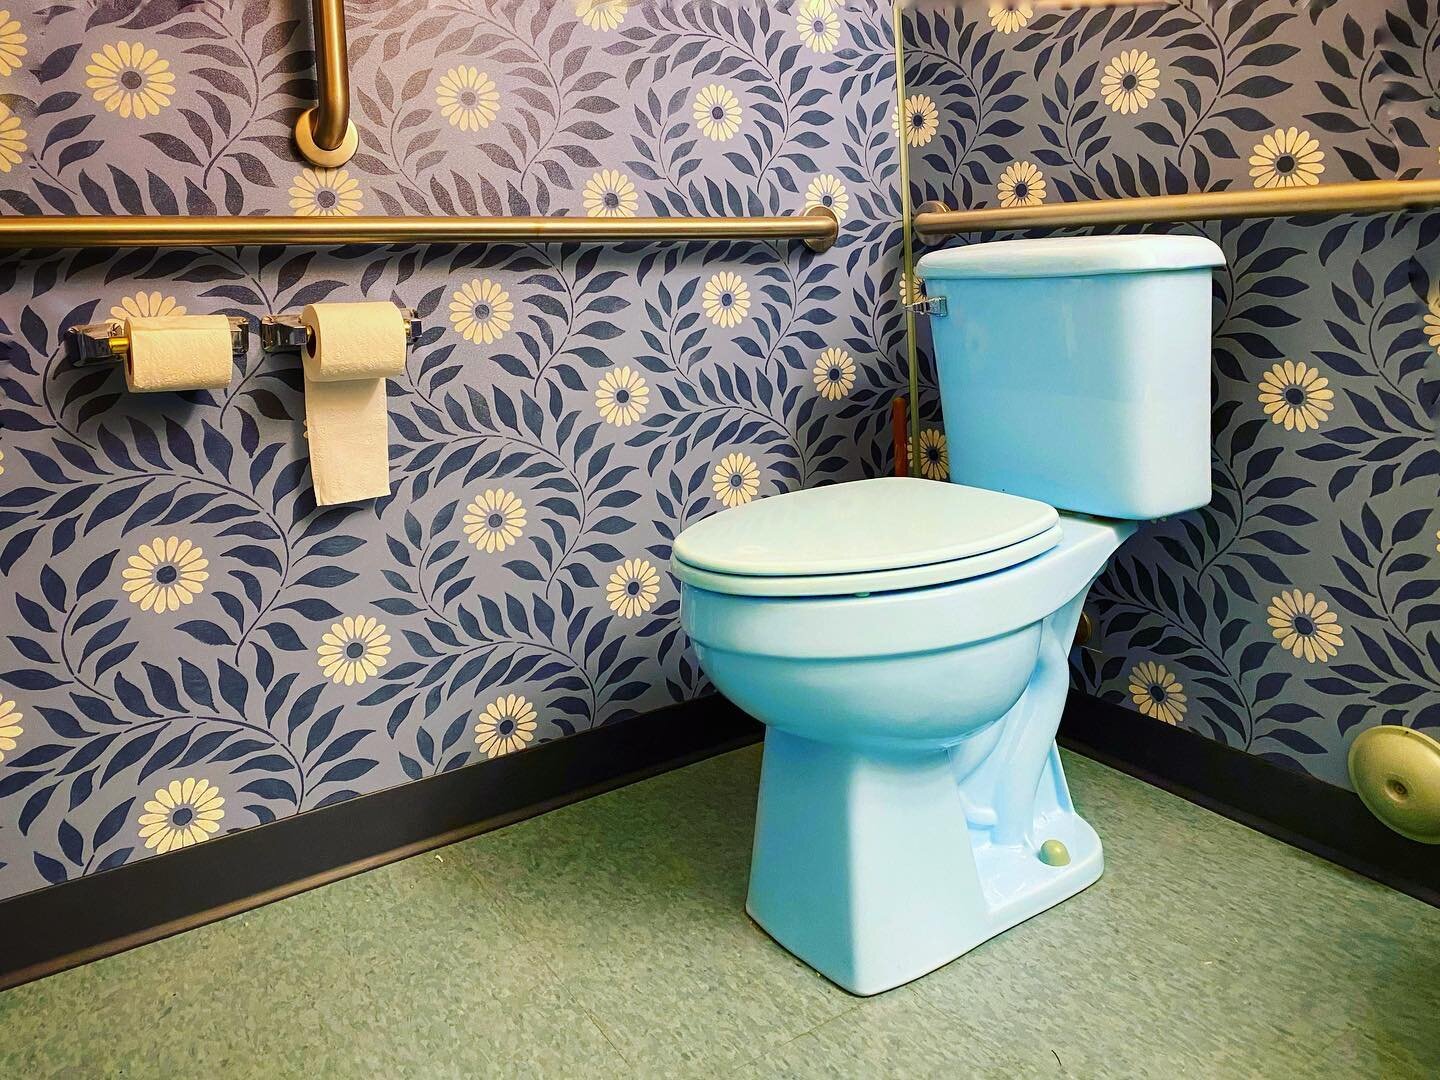 Just a toilet and some wallpaper inside a cafe&rsquo;s restroom. But dang that looks good. 
#restroomdecor #interiordesign #wallpaper #blueporcelain #blue #bluetoilet #floralwallpaper #coffeeshop #cafeculture